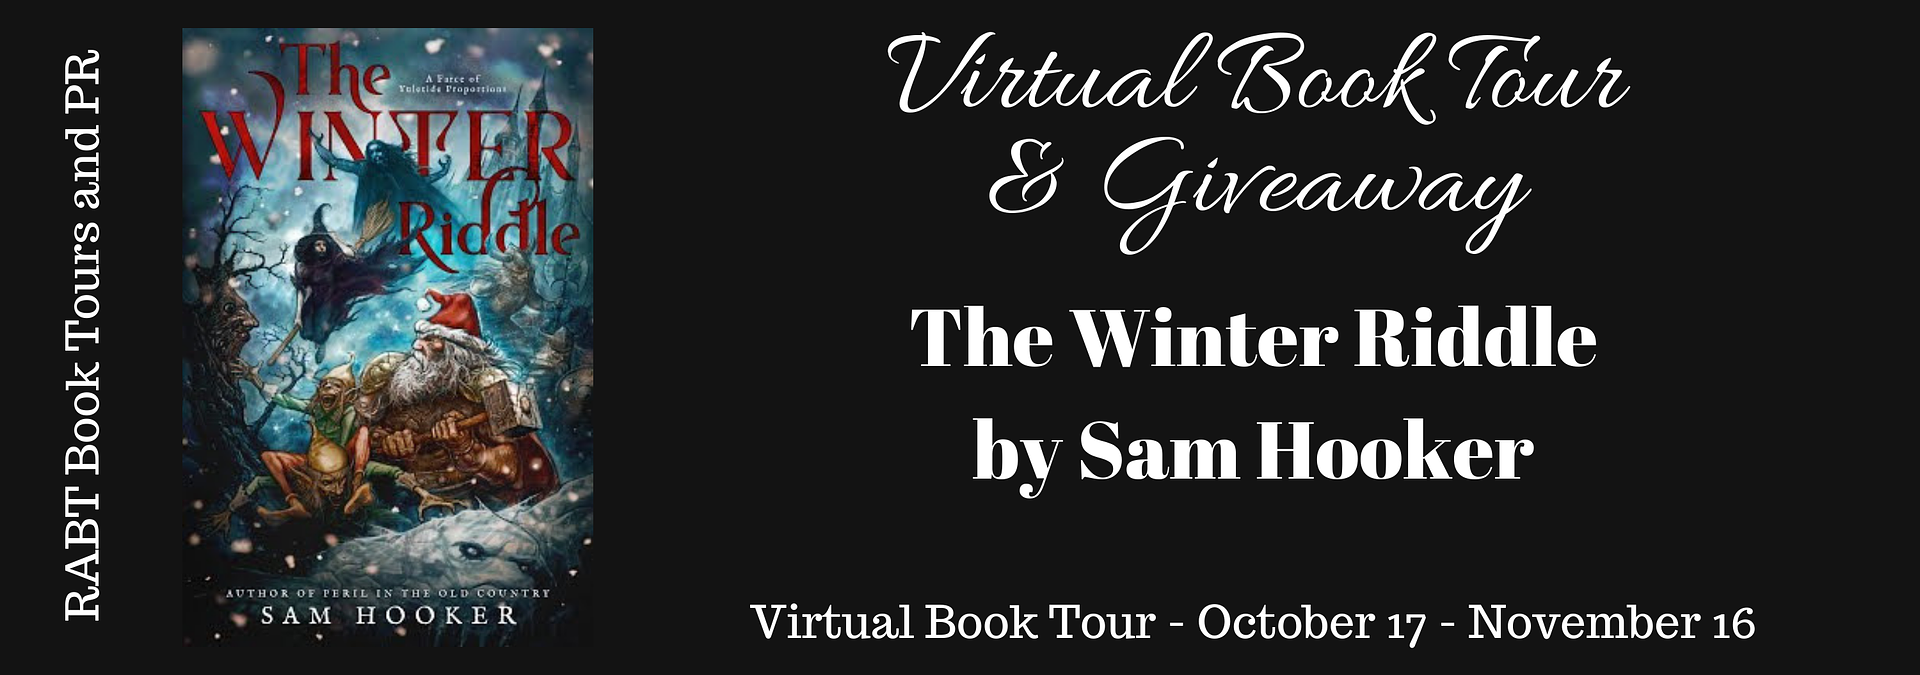 Virtual Book Tour: The Winter Riddle by @SamHooker #interview #giveaway #fantasy @RABTBookTours